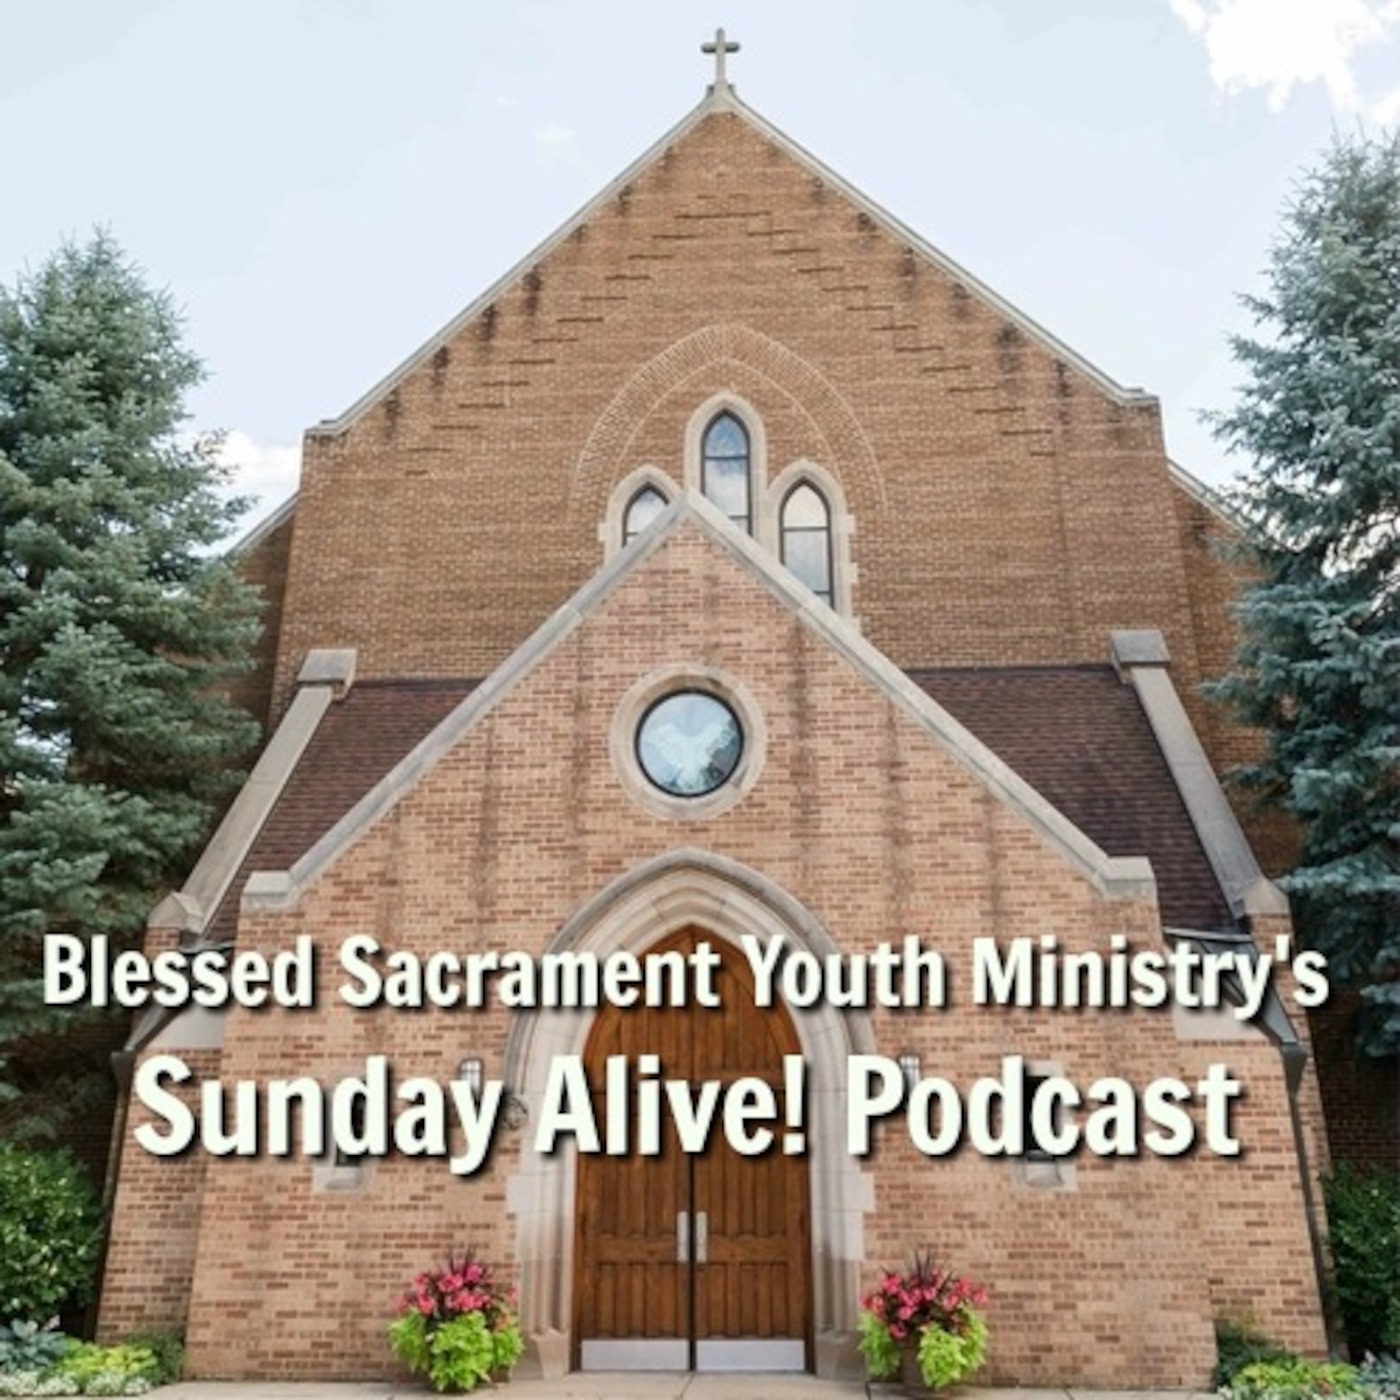 The Sunday Alive Podcast - Sunday, May 10, 2020 - the Fifth Sunday of Easter